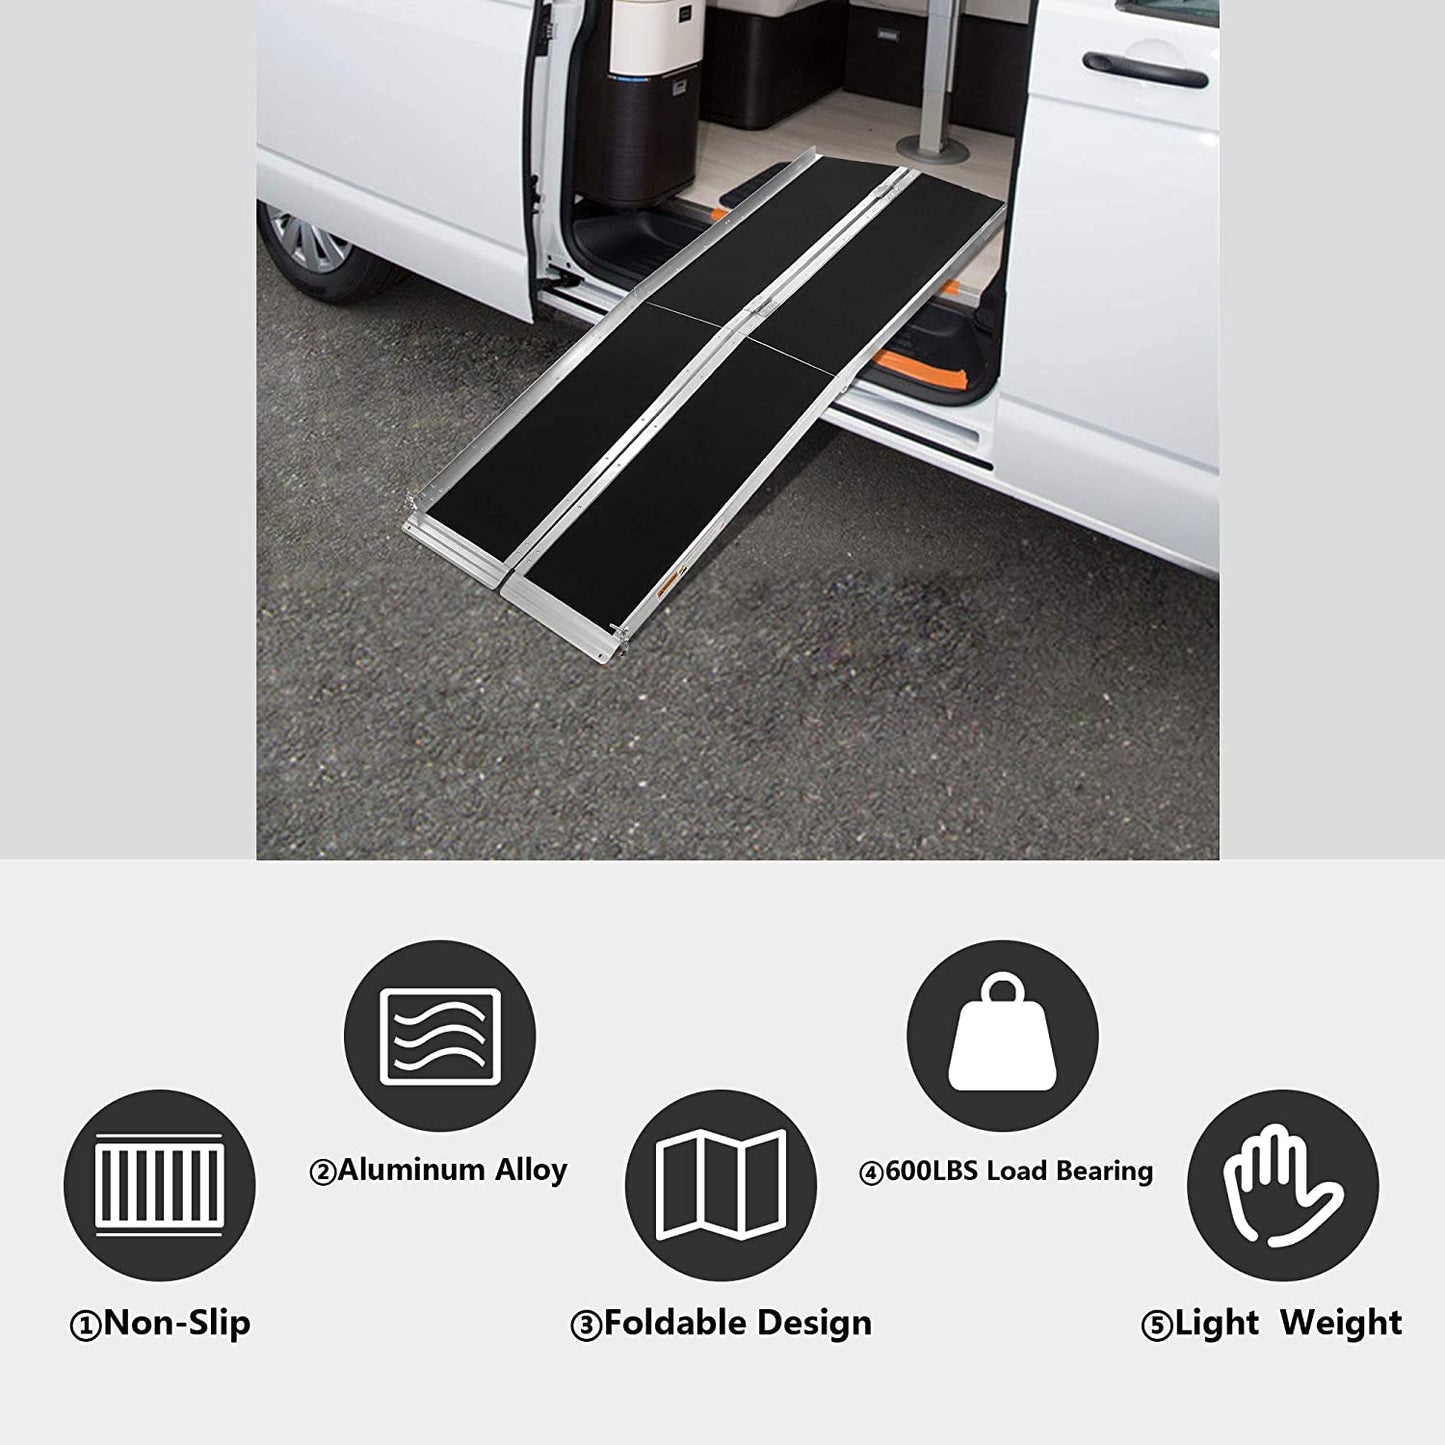 Portable Wheelchair Ramp 6Ft, Add to Your Independence, 600 LBS Capacity, Folding Aluminum Alloy Ramp, Portable Handles & Anti-Slip Carpet, for Doorways, Stairs, Mobility Scooter, Porch